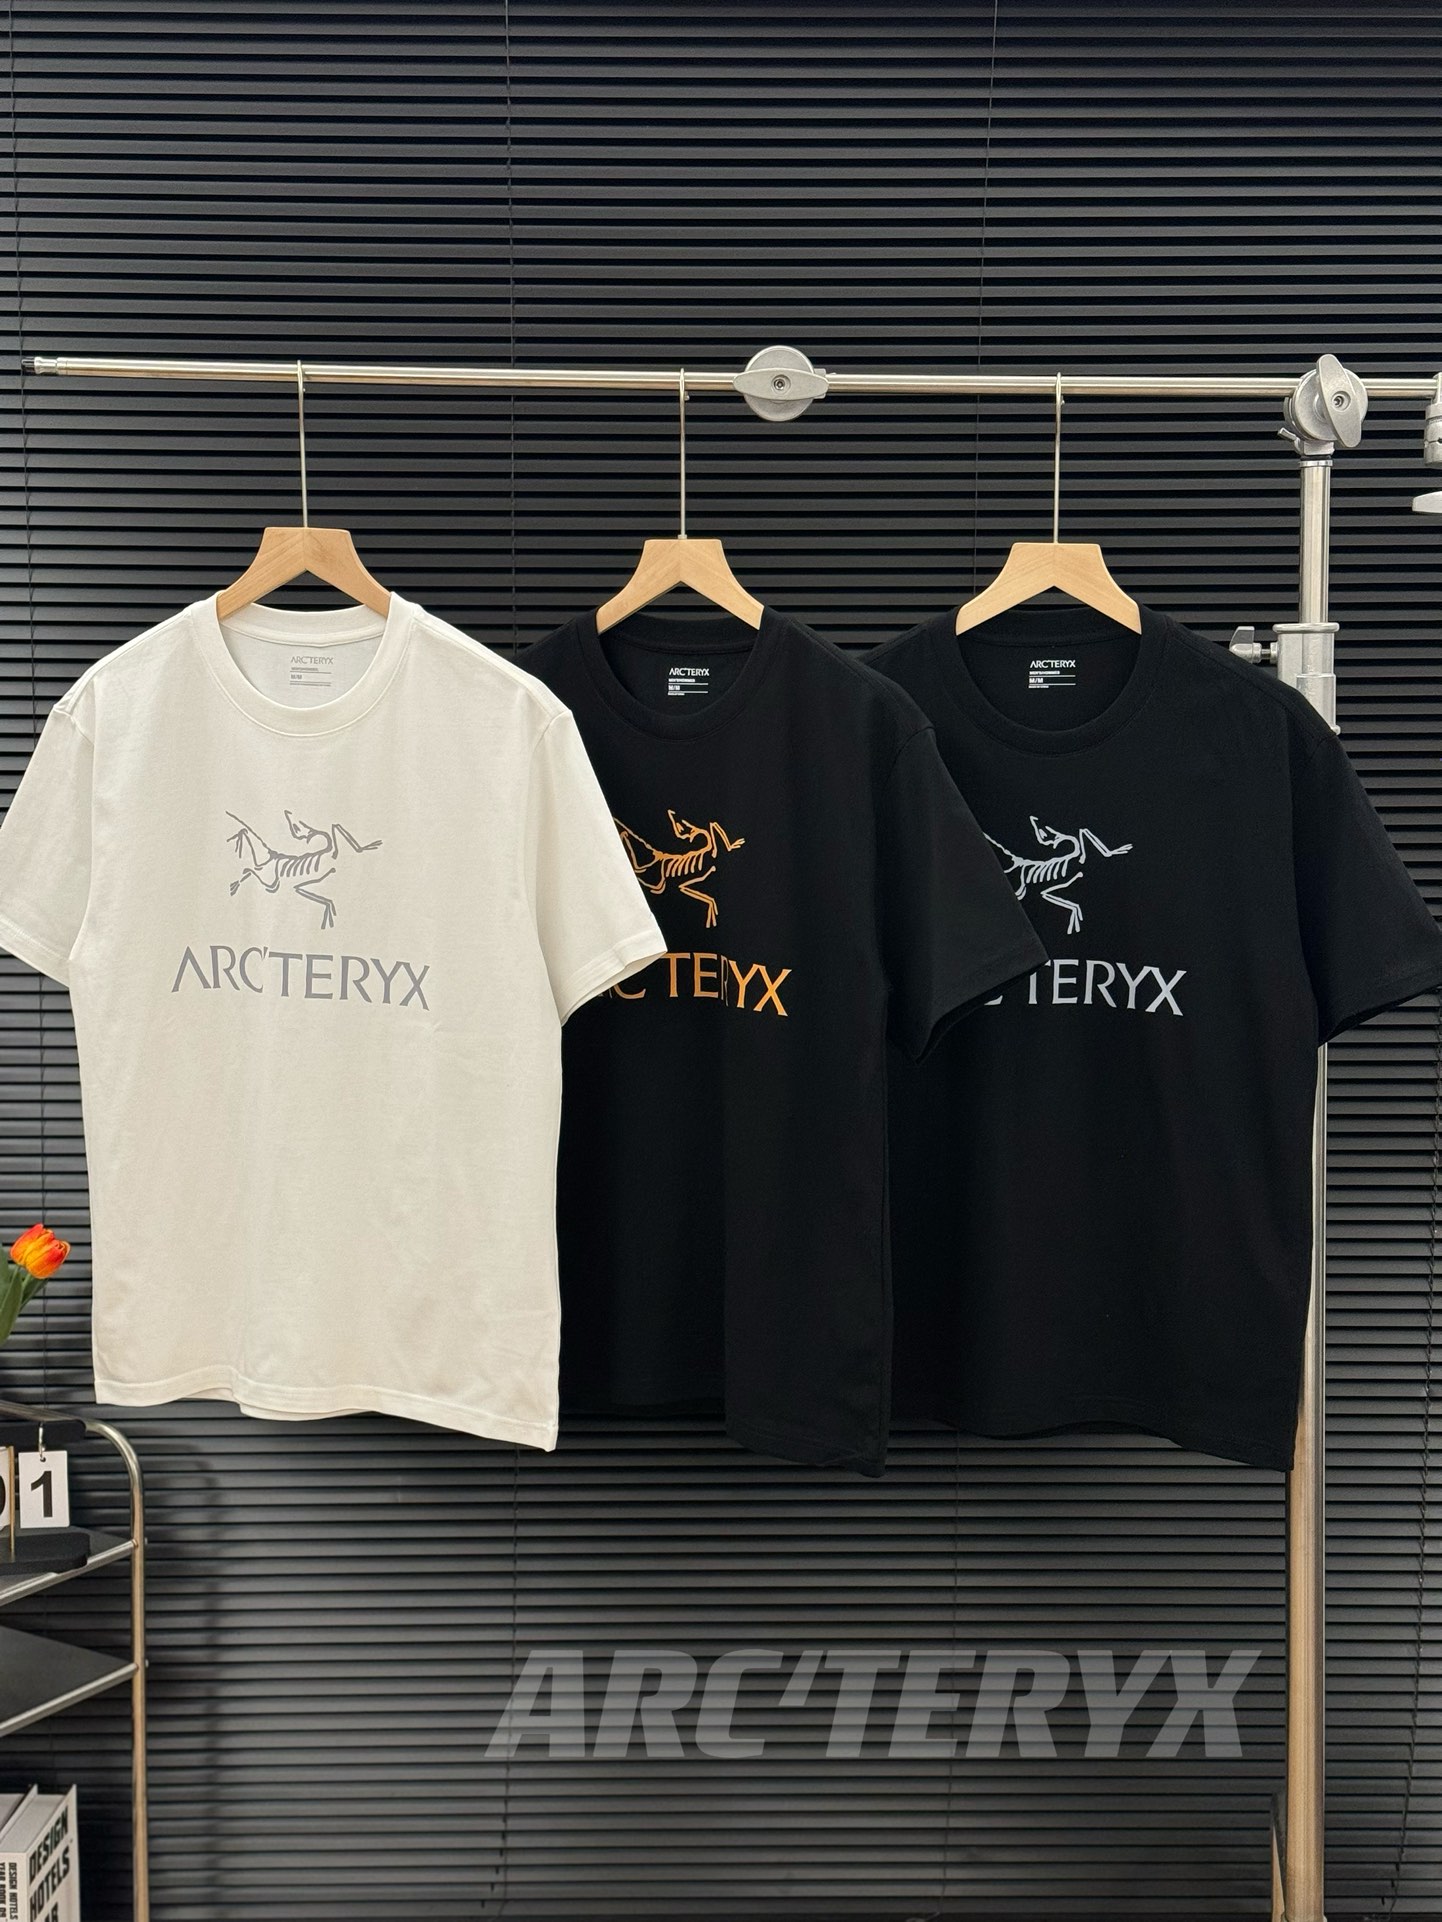 Arc’teryx Clothing T-Shirt Exclusive Cheap
 Black Pink White Printing Unisex Cotton Summer Collection Fashion Short Sleeve